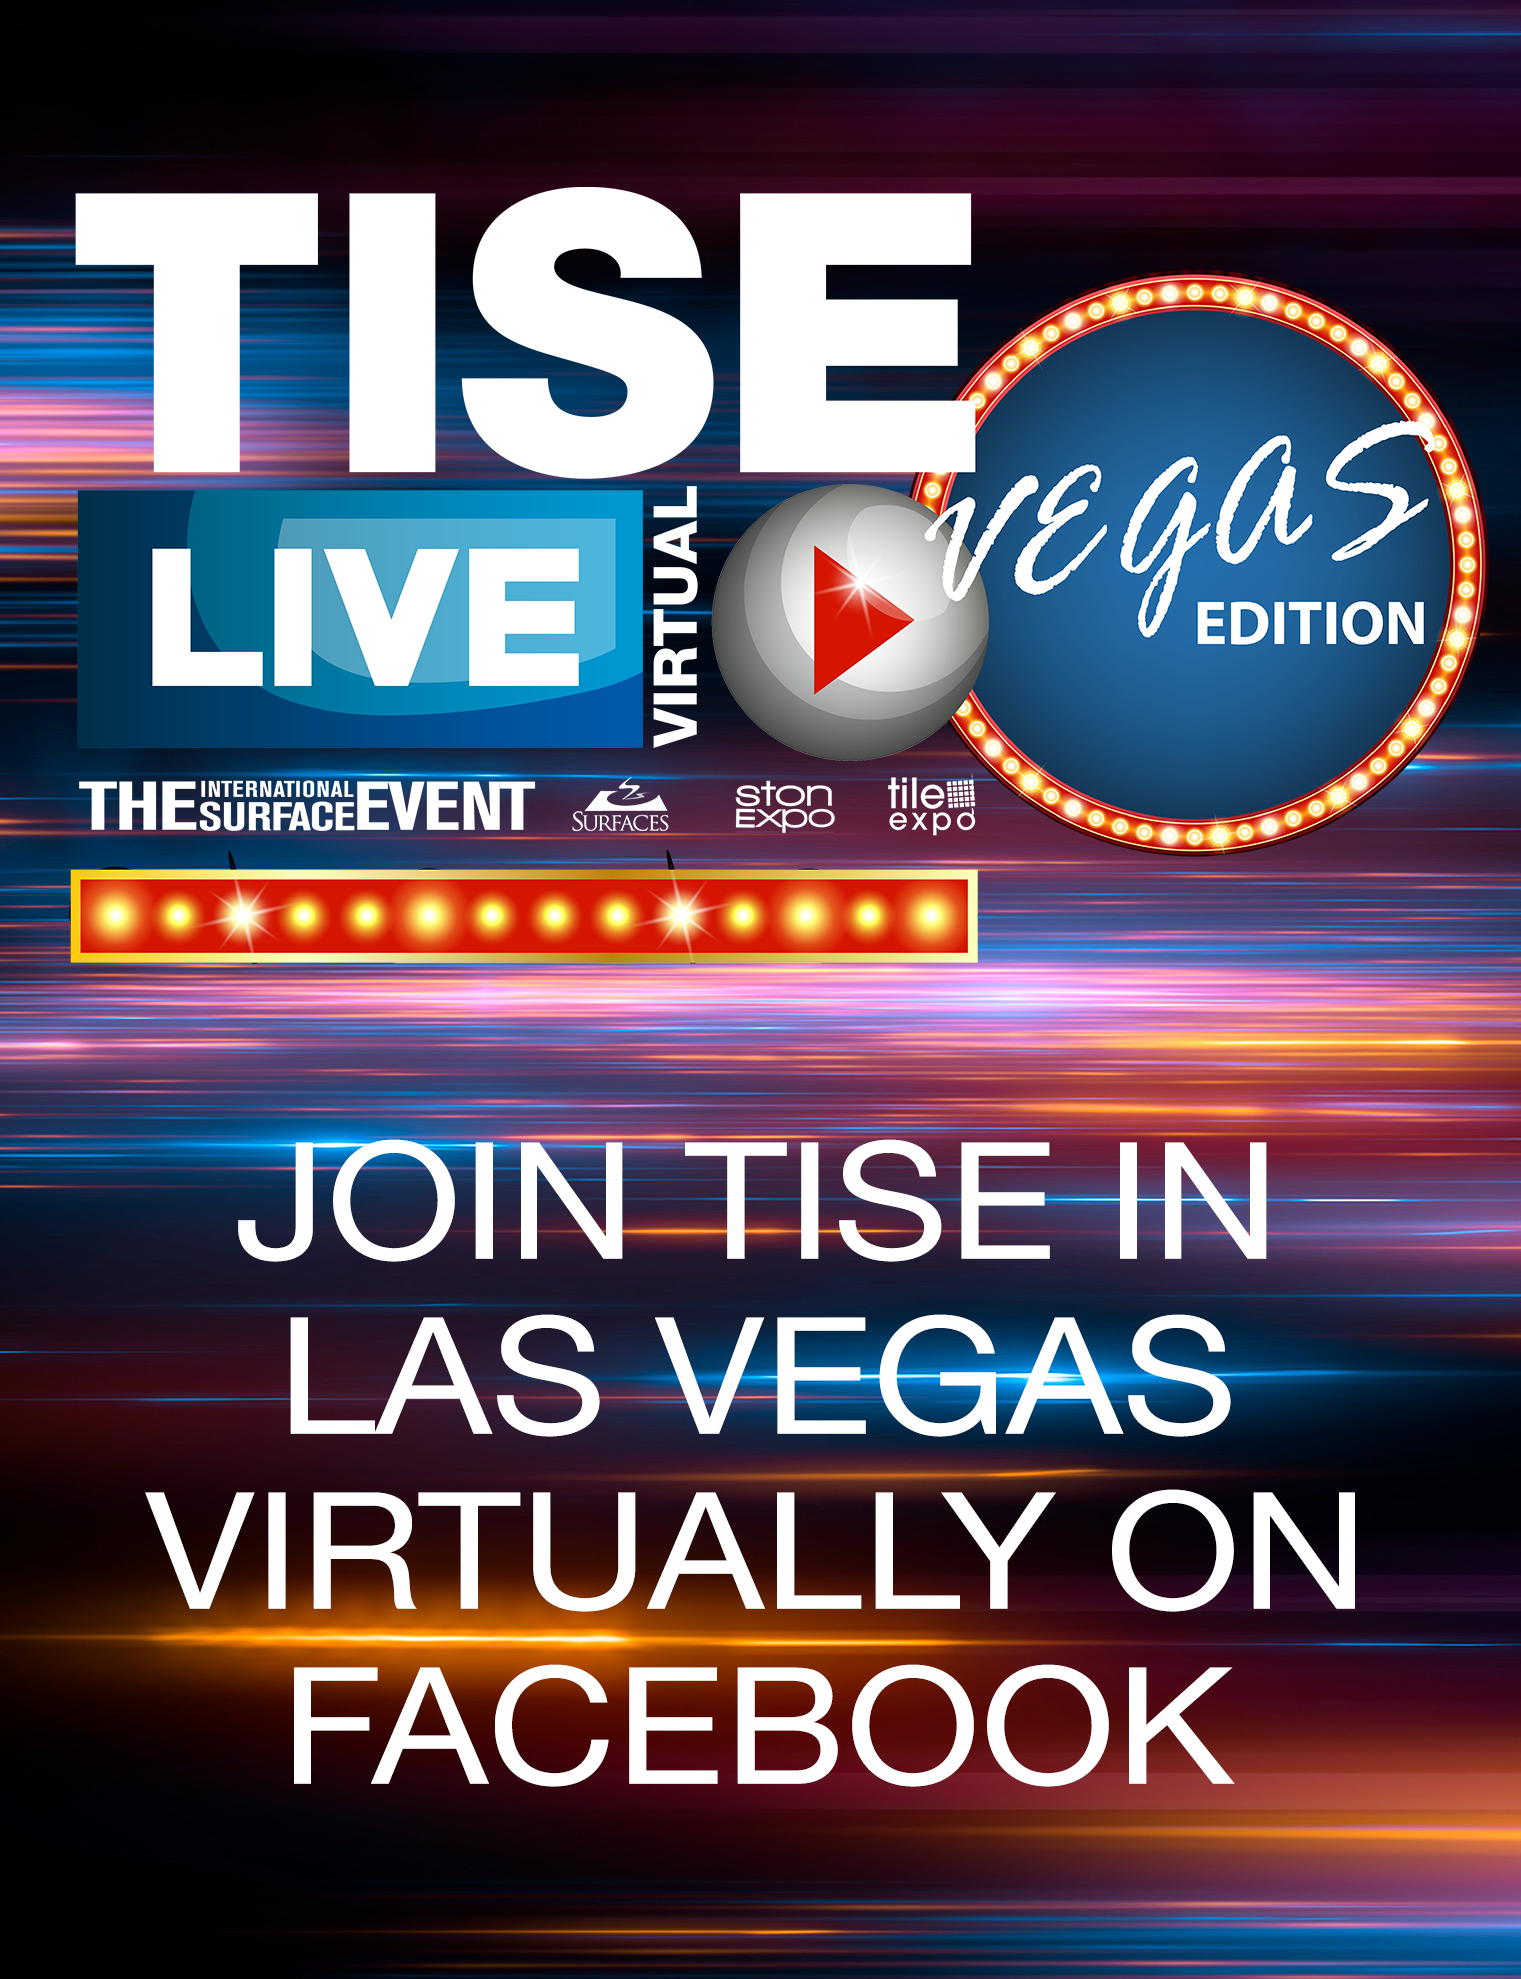 TISE Live Virtual Event Vegas Edition from The International Surface Event